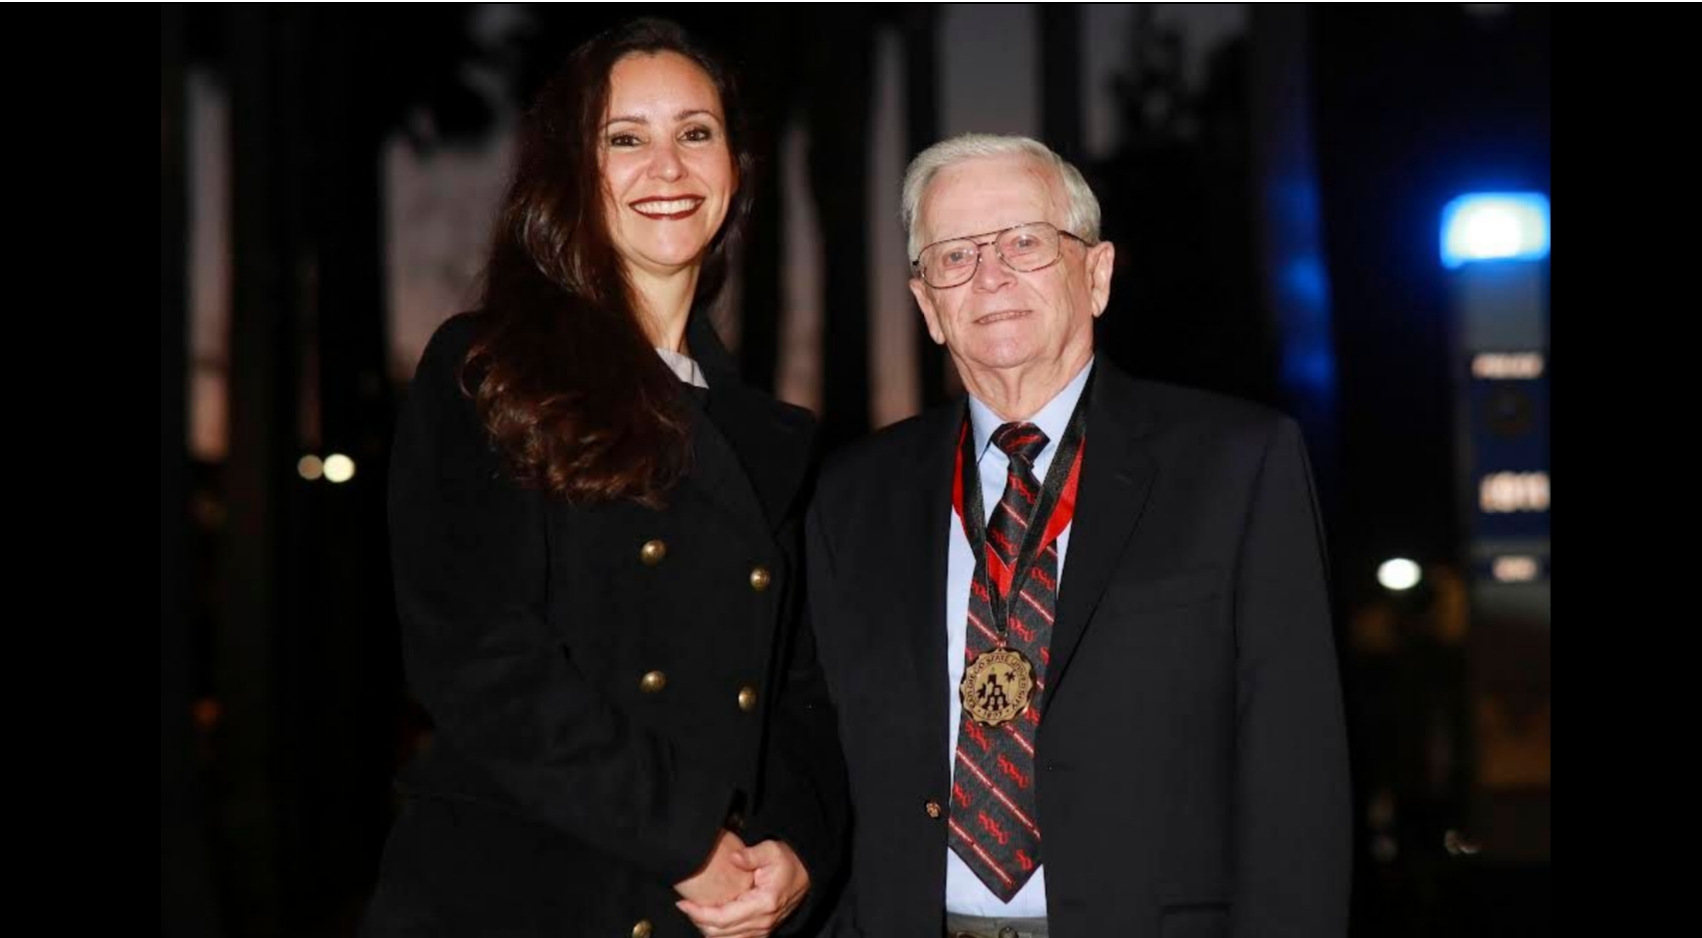 SDSU grad Claudia Mowery (left) was finally able to meet and personally thank William E. Leonhard Jr. for his support during the Evening of Philanthropy event in January.